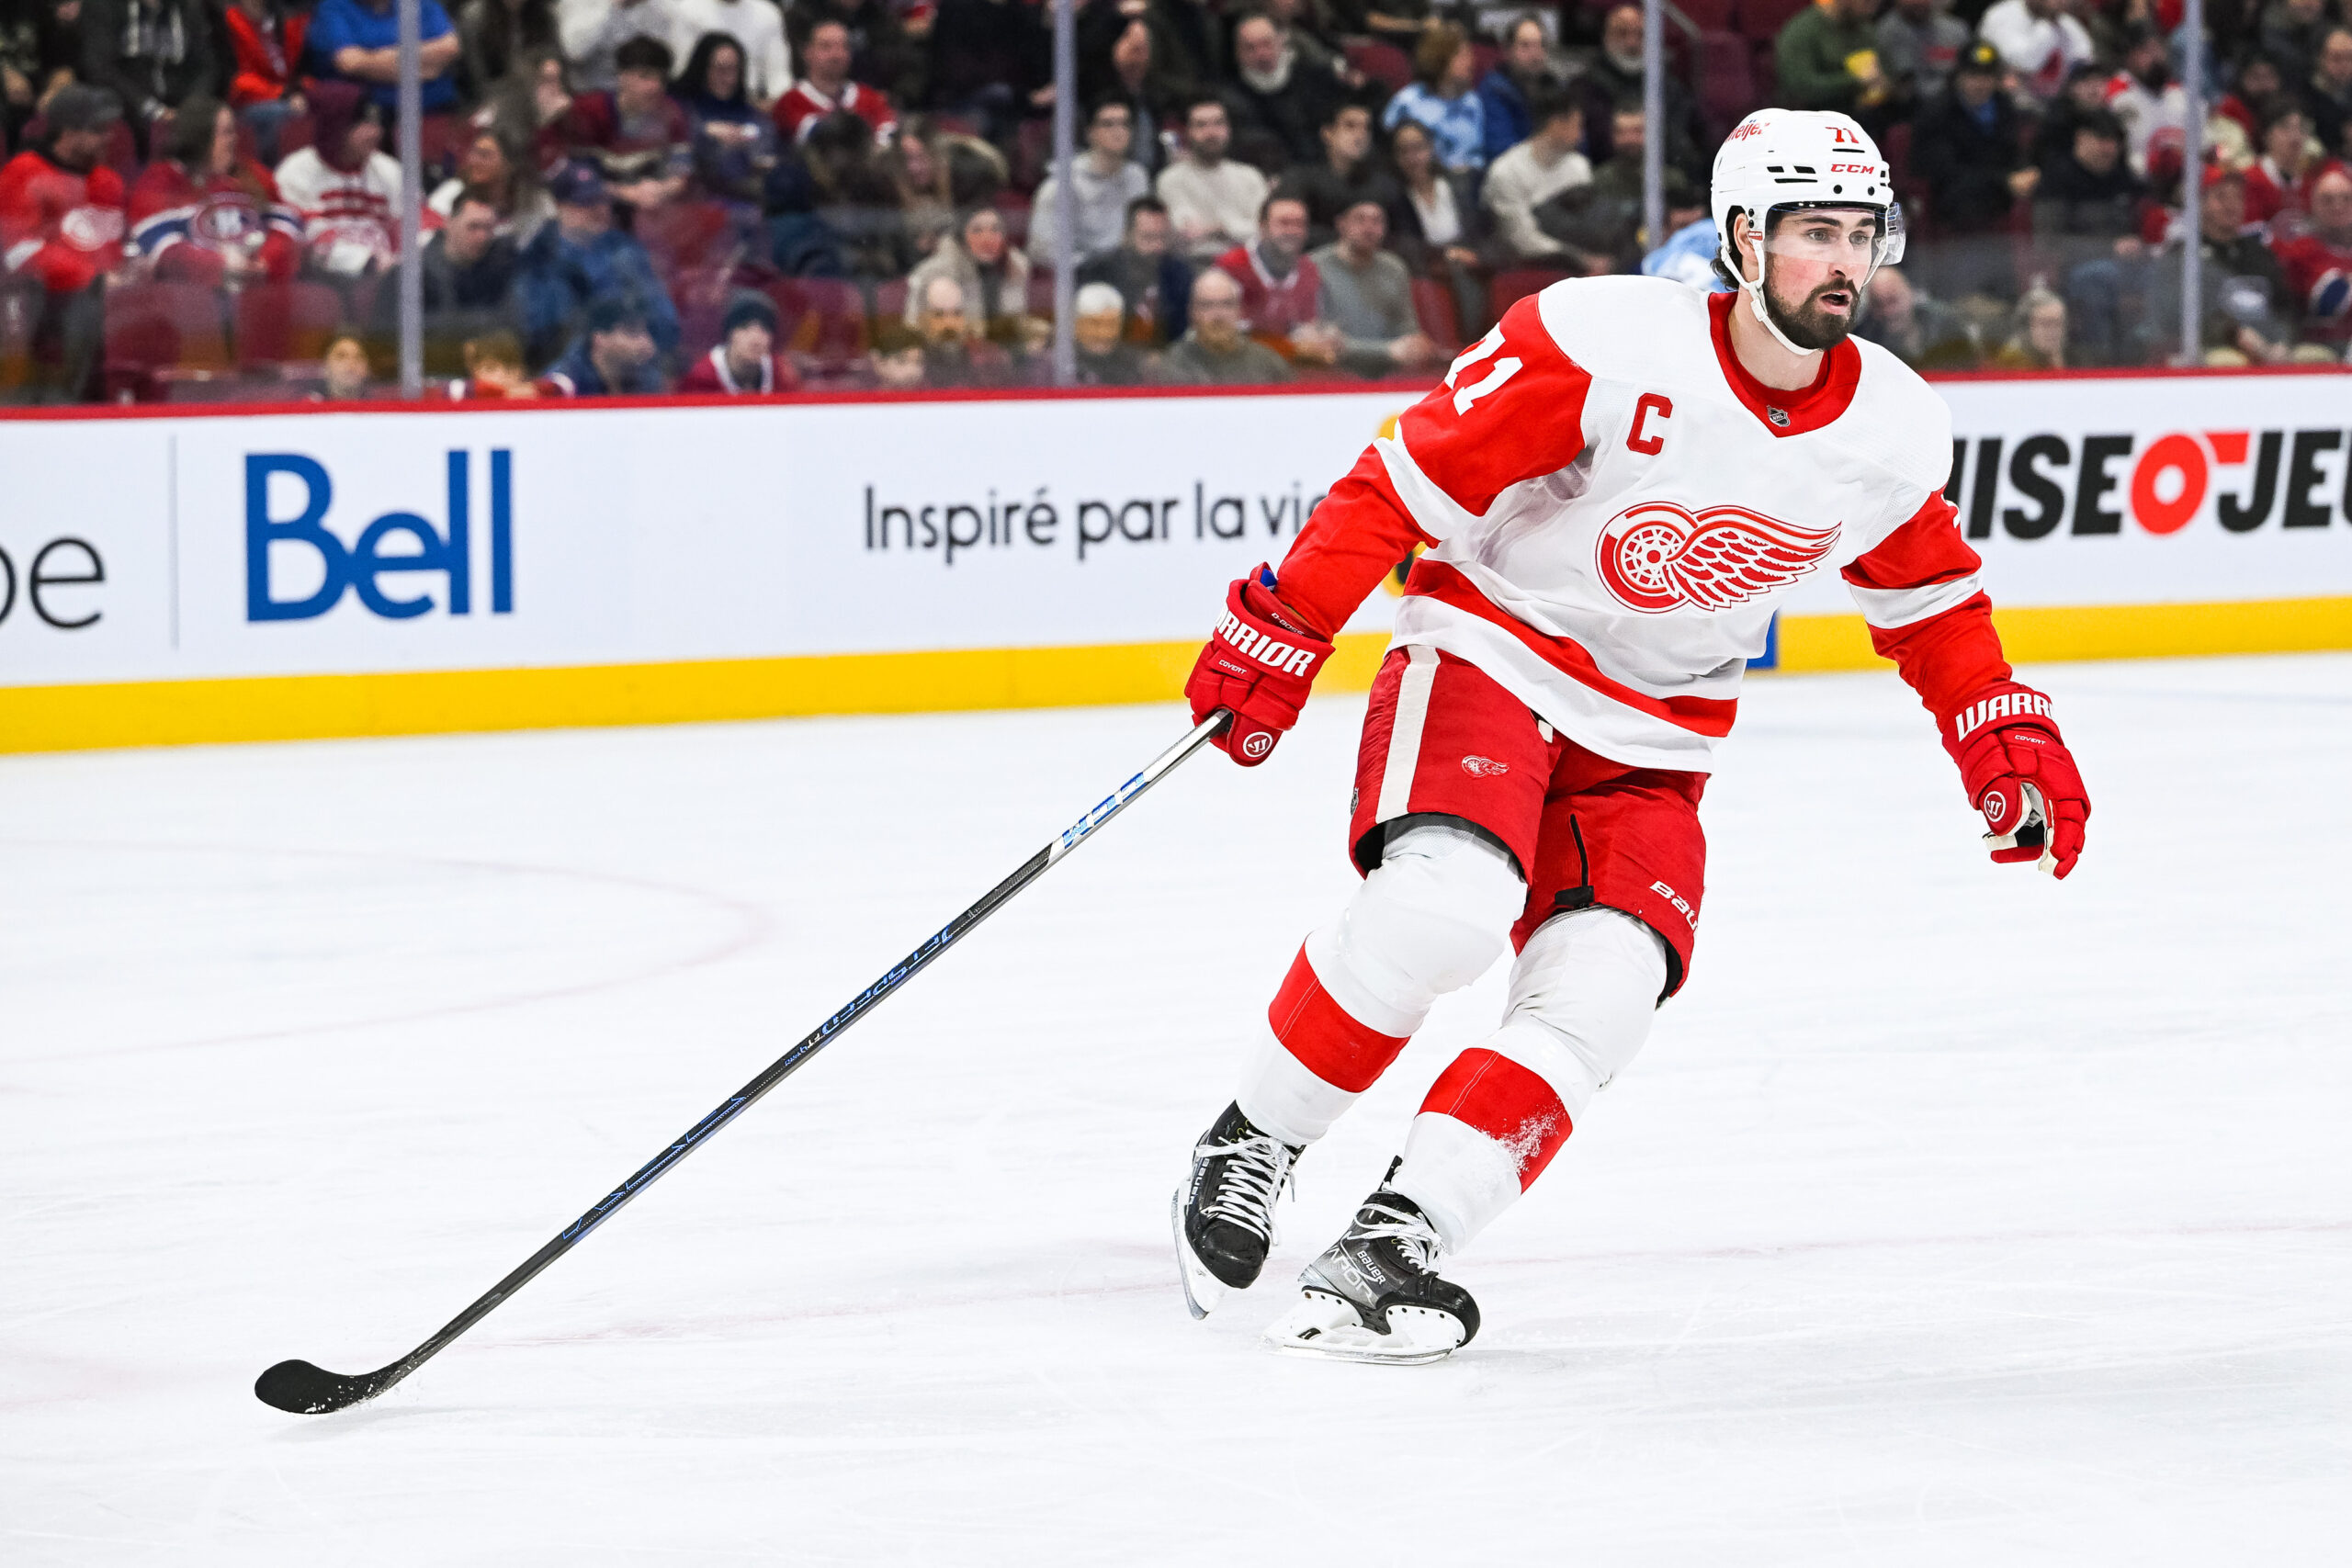 The story of how Dylan Larkin came to wear No. 71 for the Detroit Red Wings  